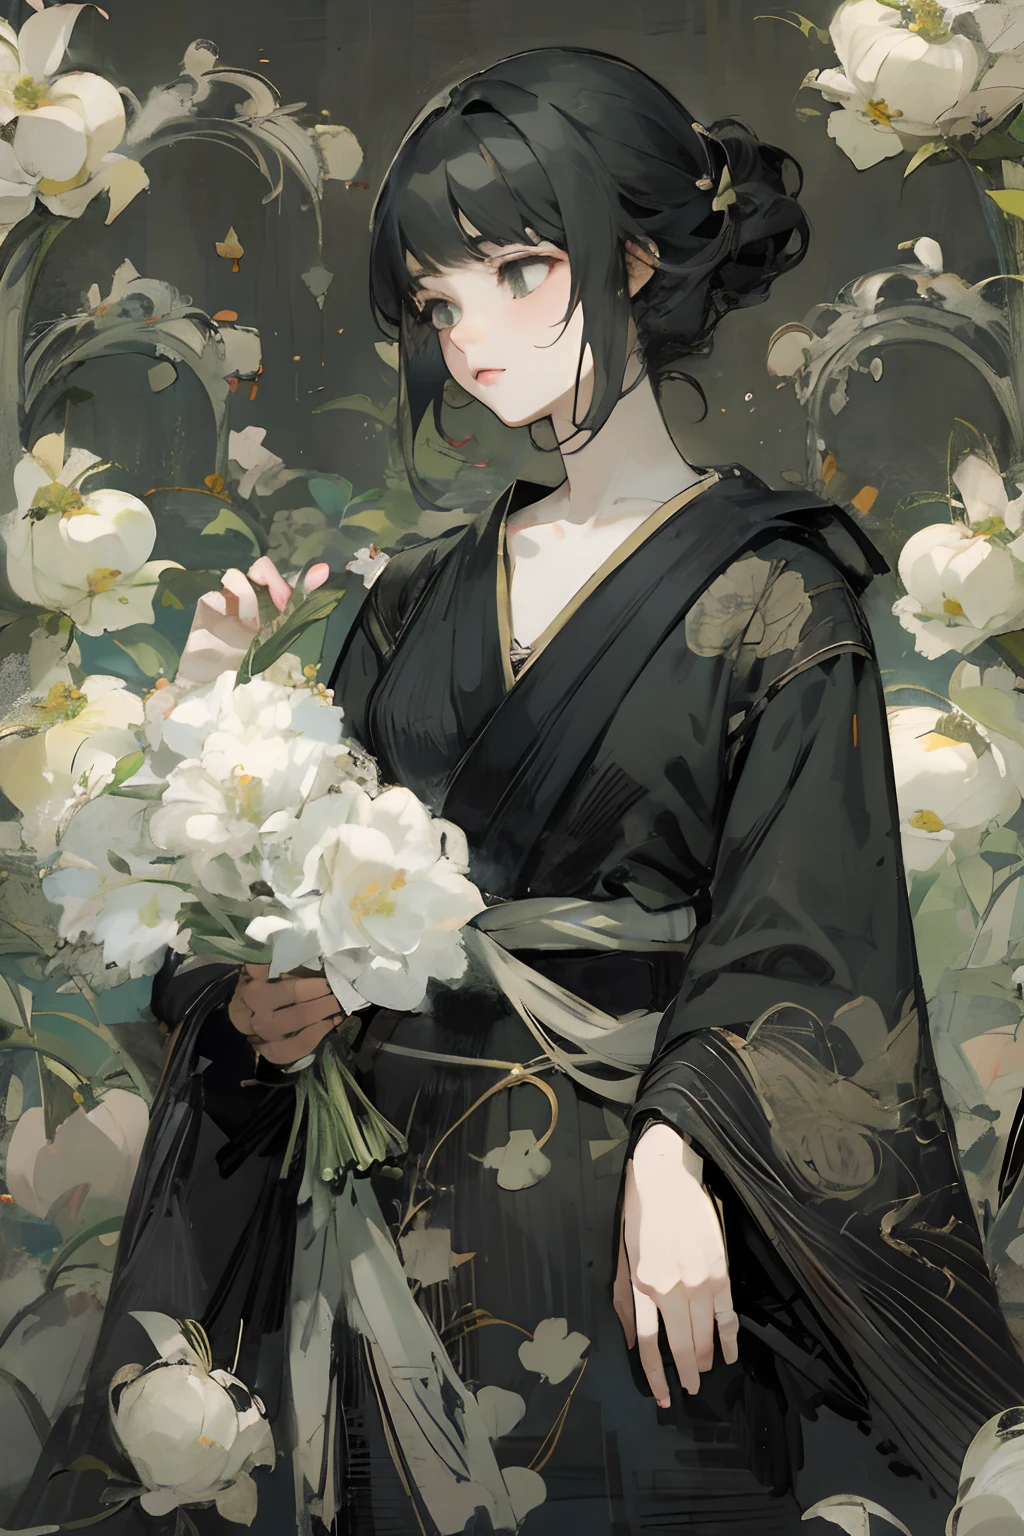 there is a woman holding a bunch of flowers in her hand, digital art of an elegant, with flowers, anime girl wearing a black dress, in the art style of bowater, inspired by Ma Yuanyu, holding flowers, in style of digital illustration, female portrait with flowers, inspired by Itō Shinsui, elegant girl, a beautiful artwork illustration